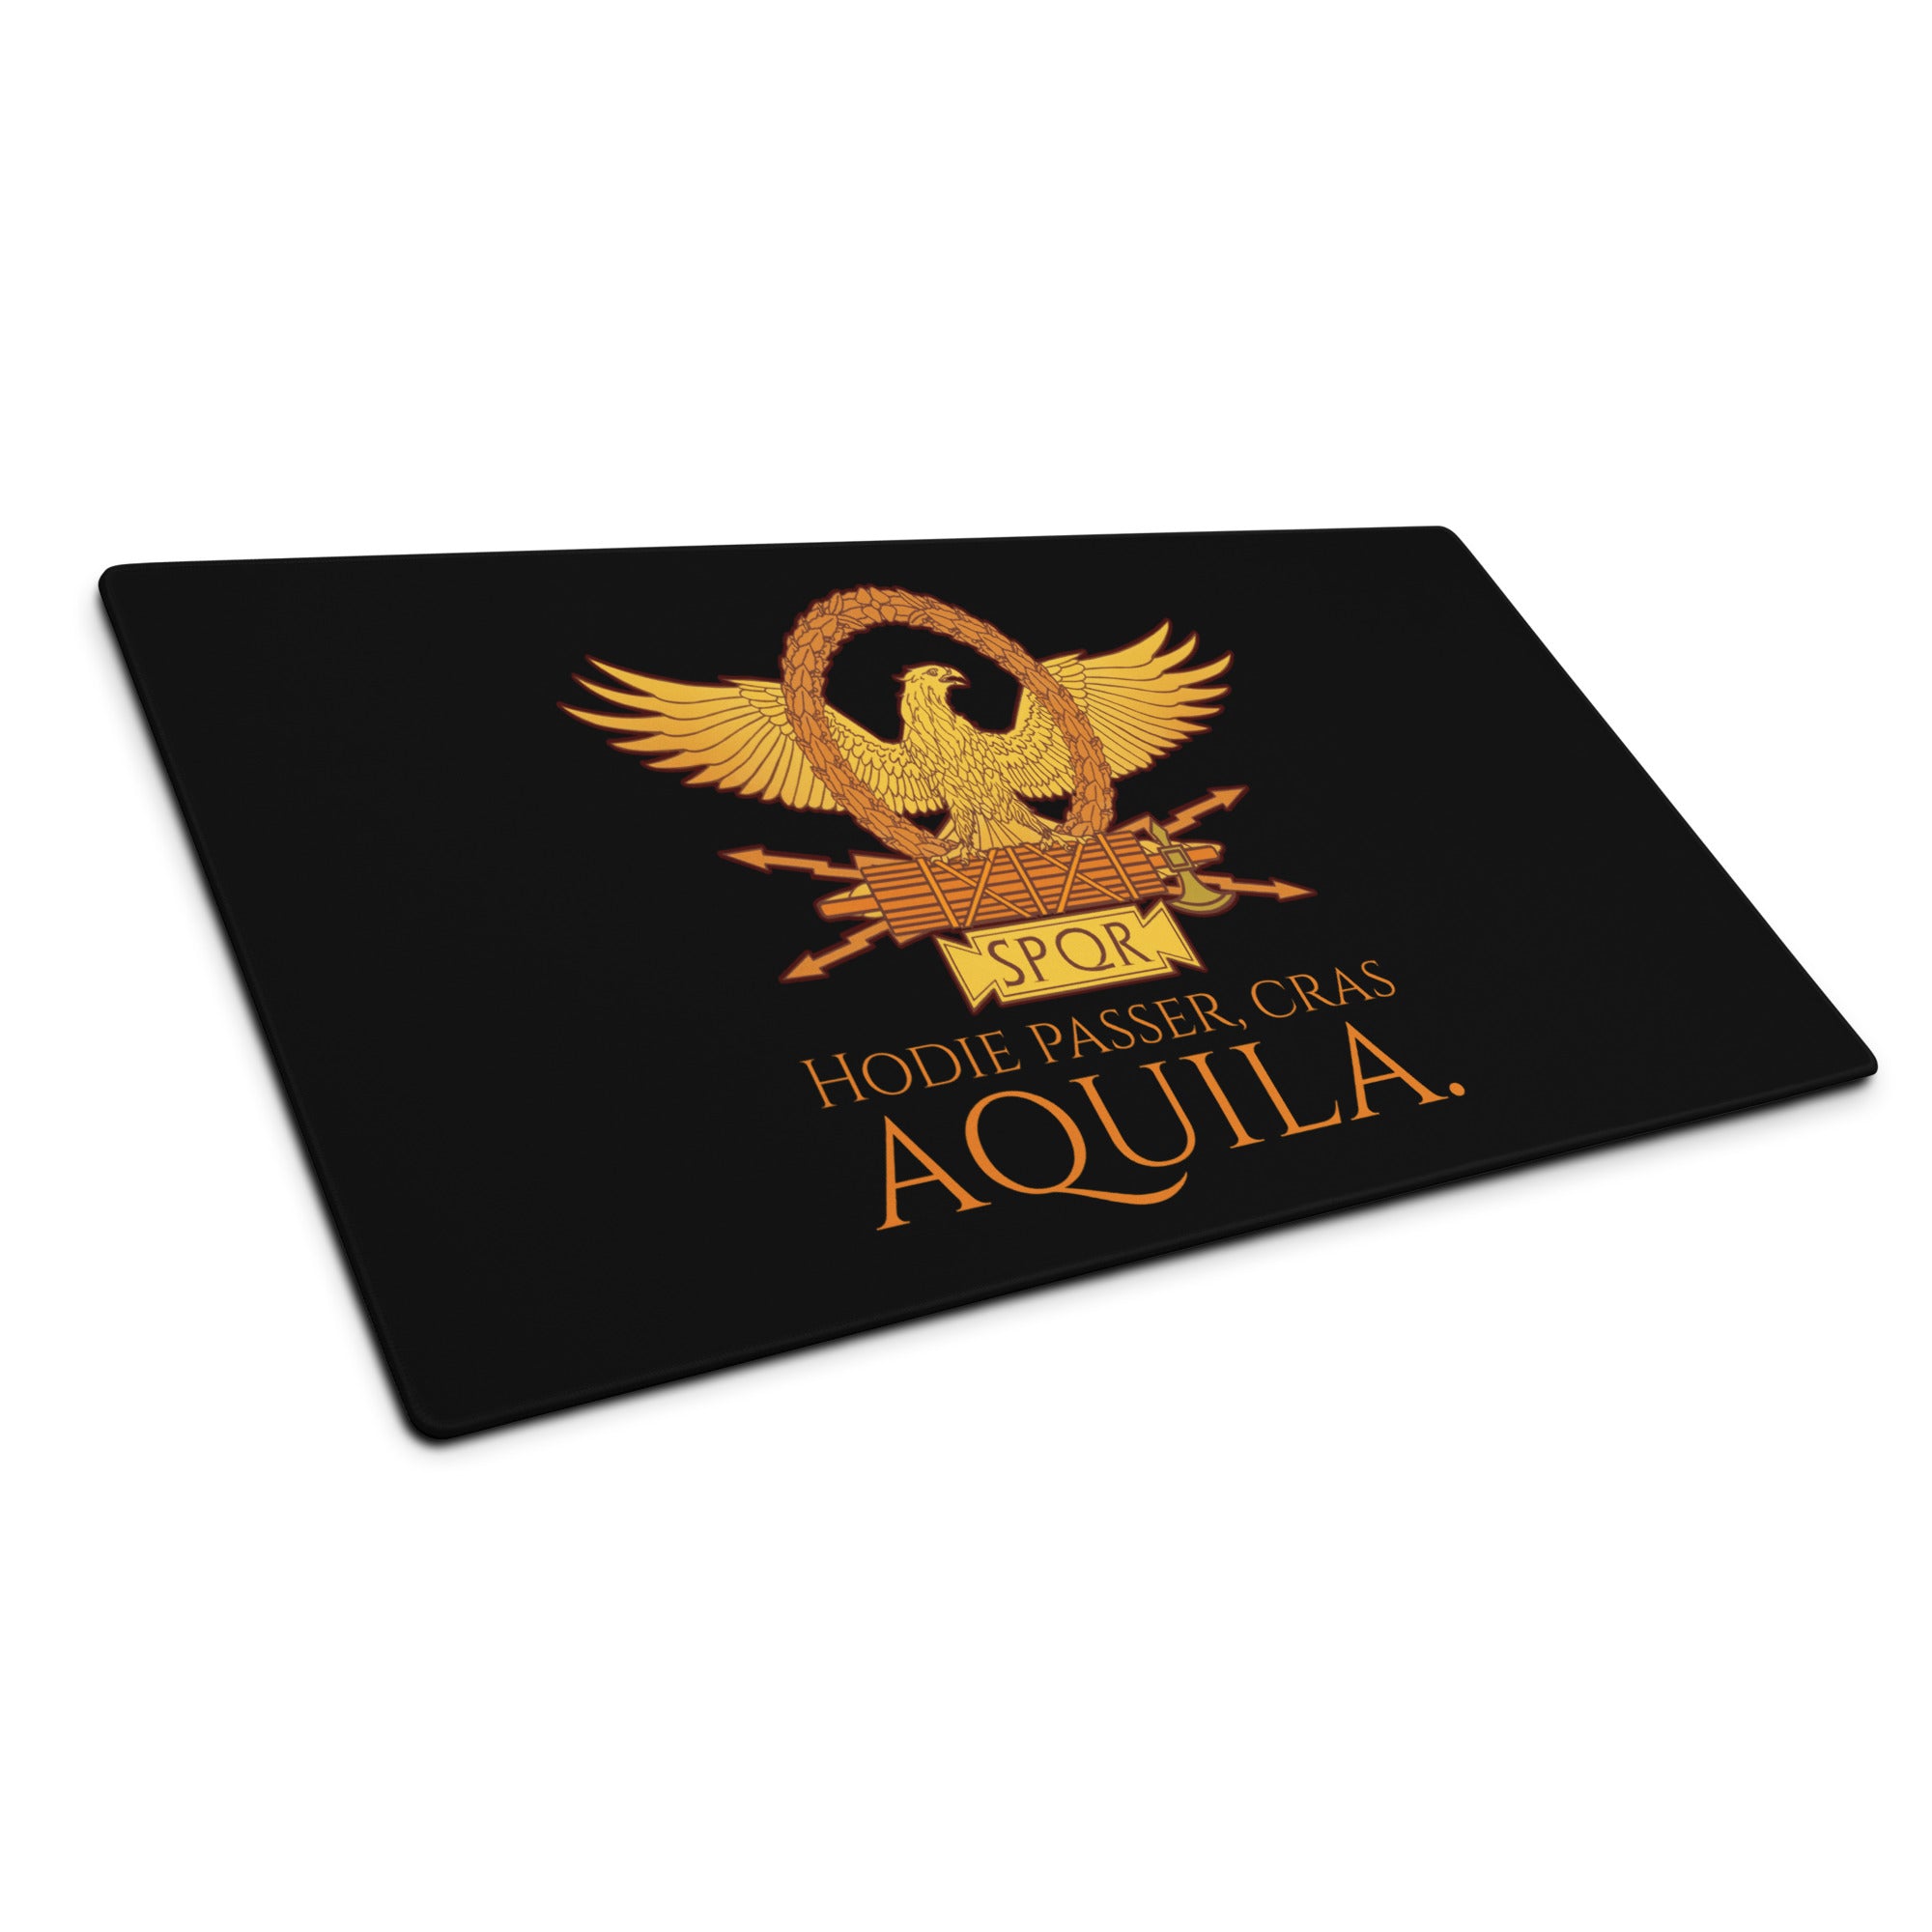 Hodie Passer, Cras Aquila. - Today A Sparrow, Tomorrow An Eagle - Ancient Rome Latin Language - Gaming Mouse Pad